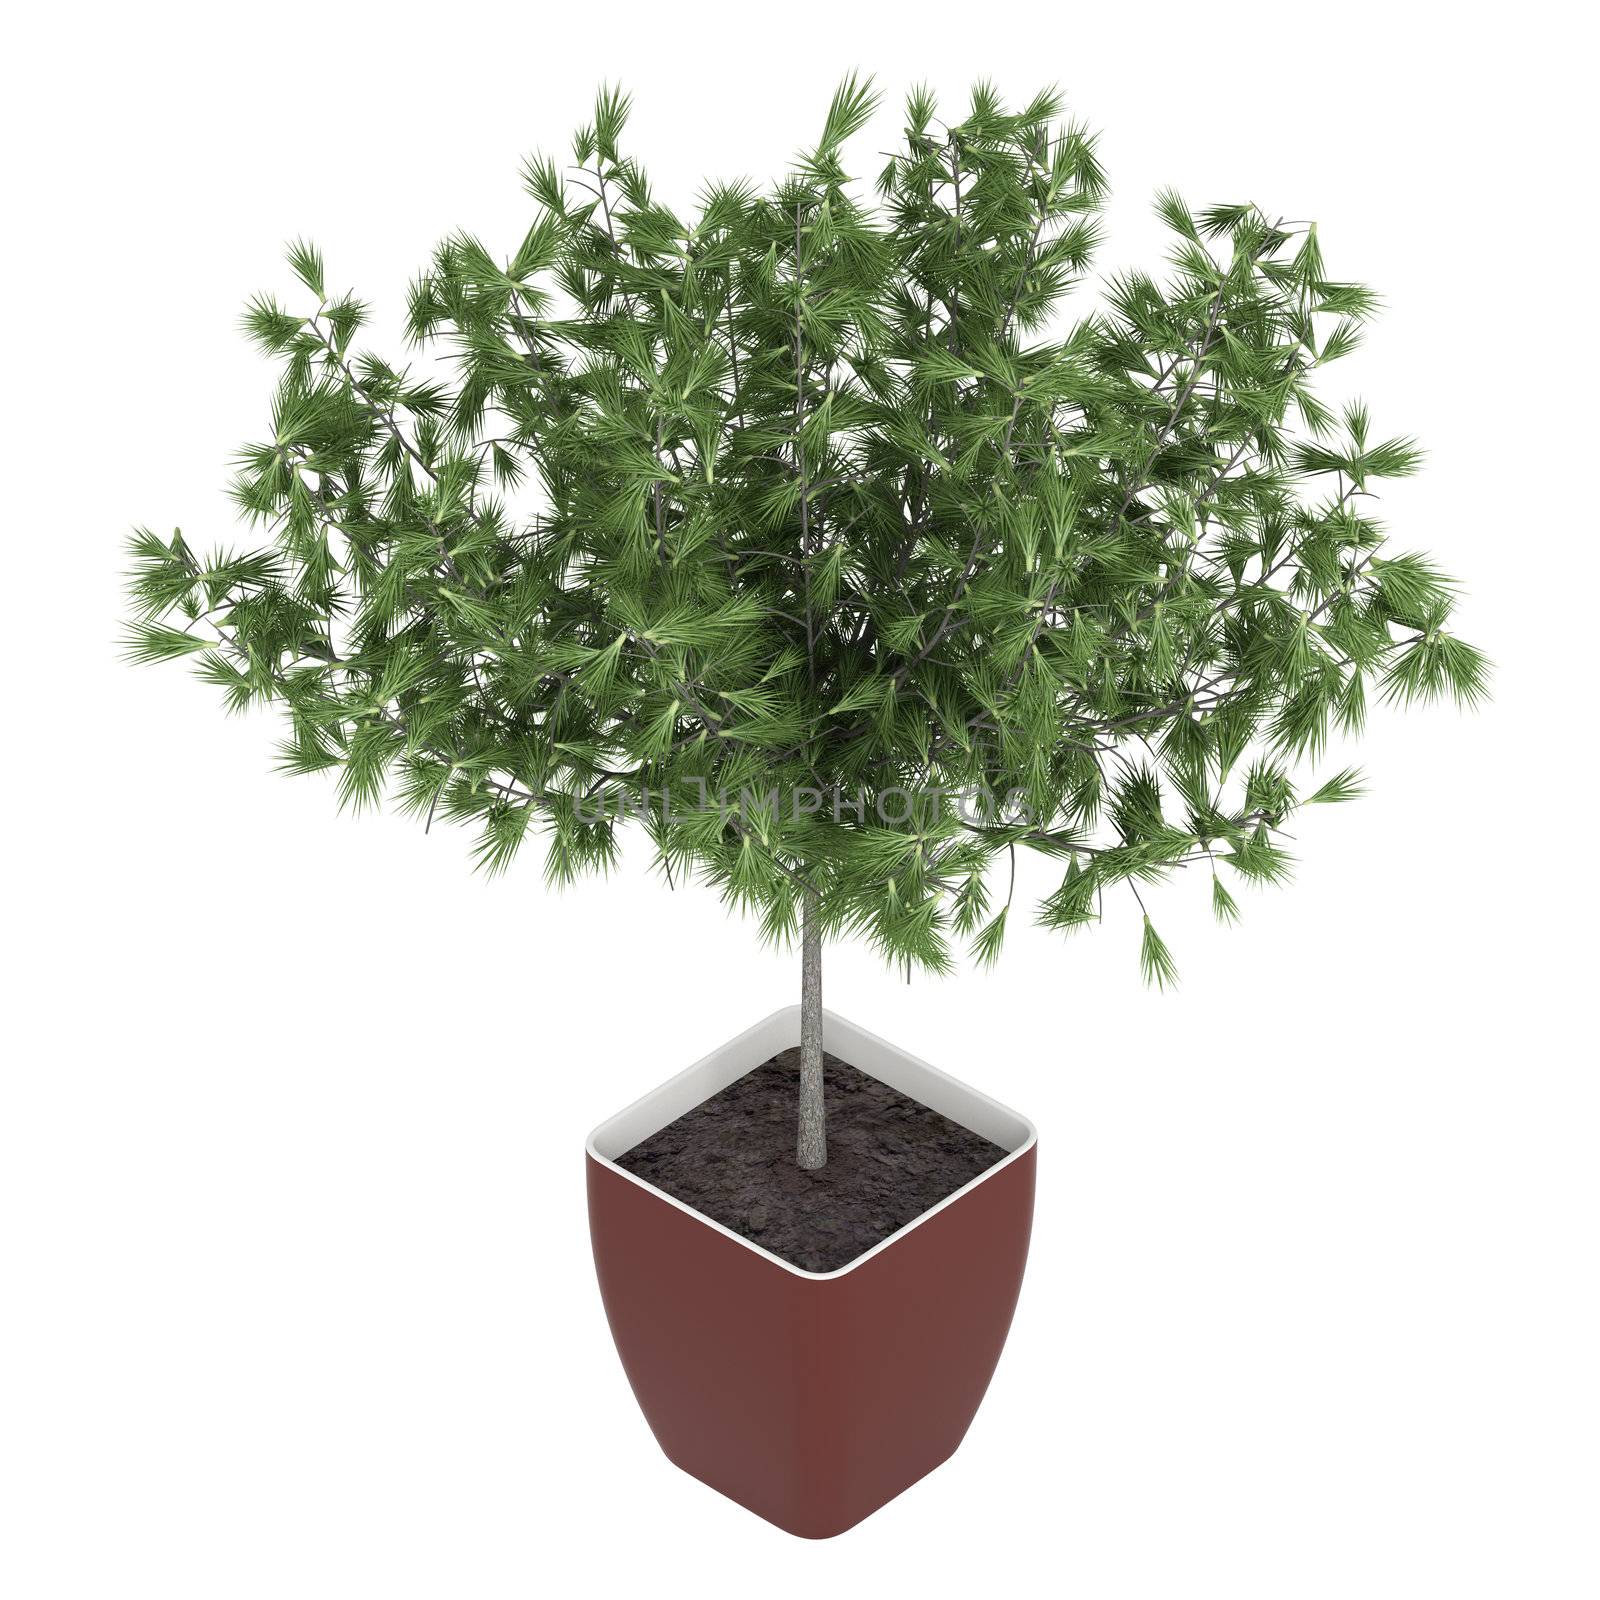 Potted manicured cypress with a trimmed stem and leafy crown growing in a rectangular ceramic container isolated on white